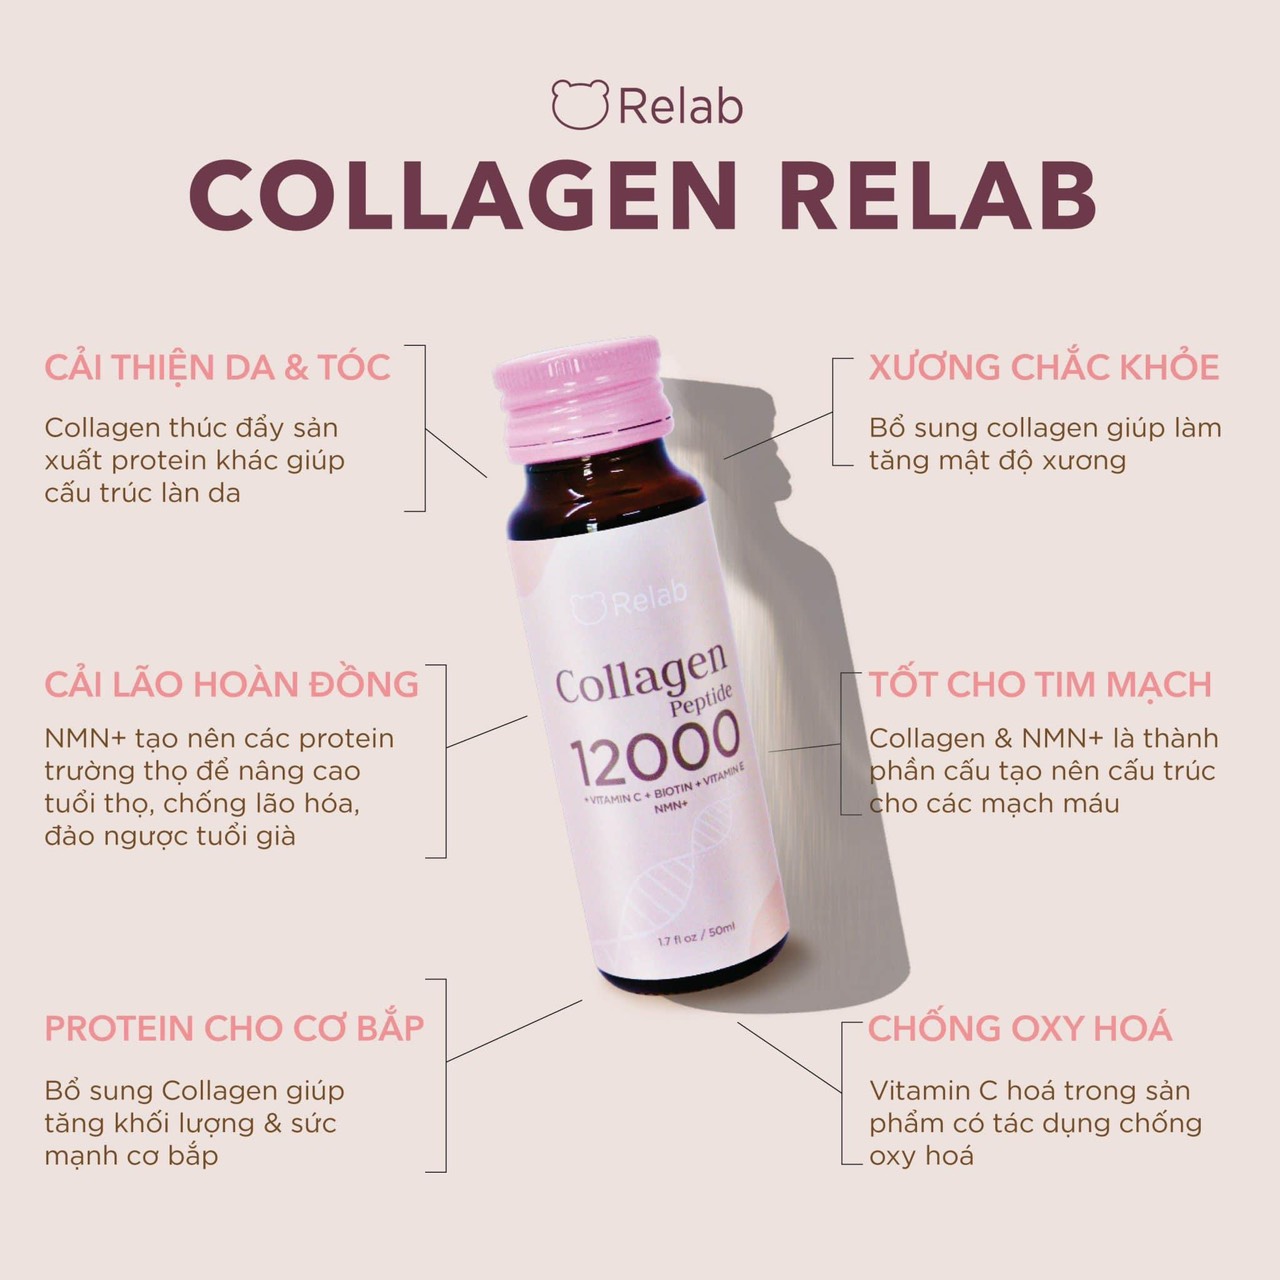 collagen-relab-12000mg-japan-combo-2-thang-5-hop